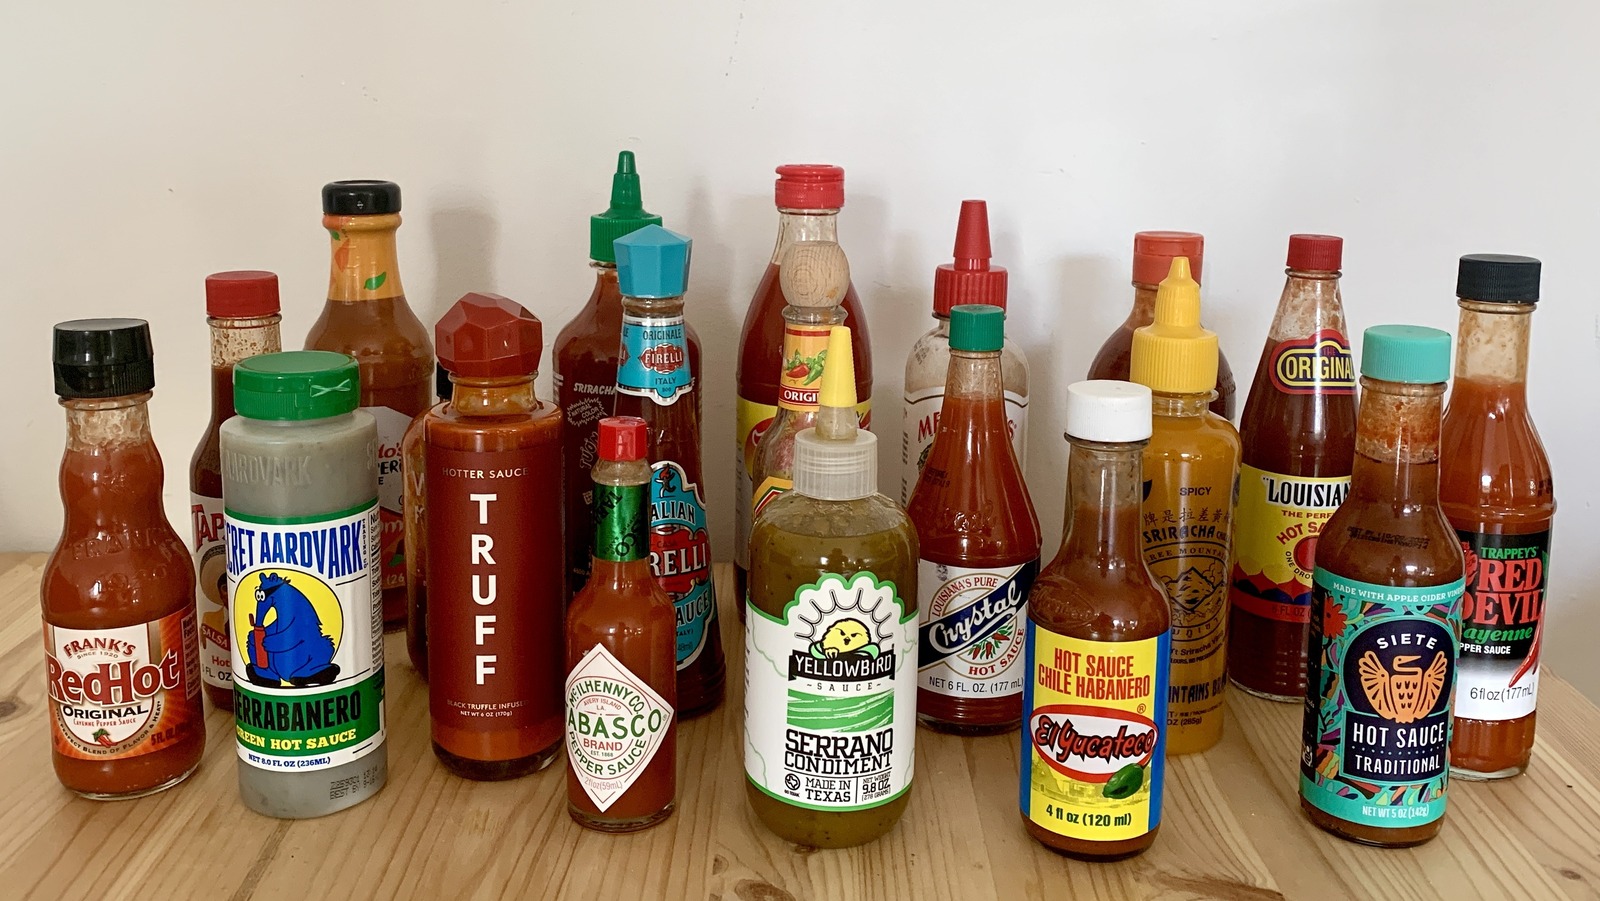 Louisiana Hot Sauce Ingredients: What's In It?